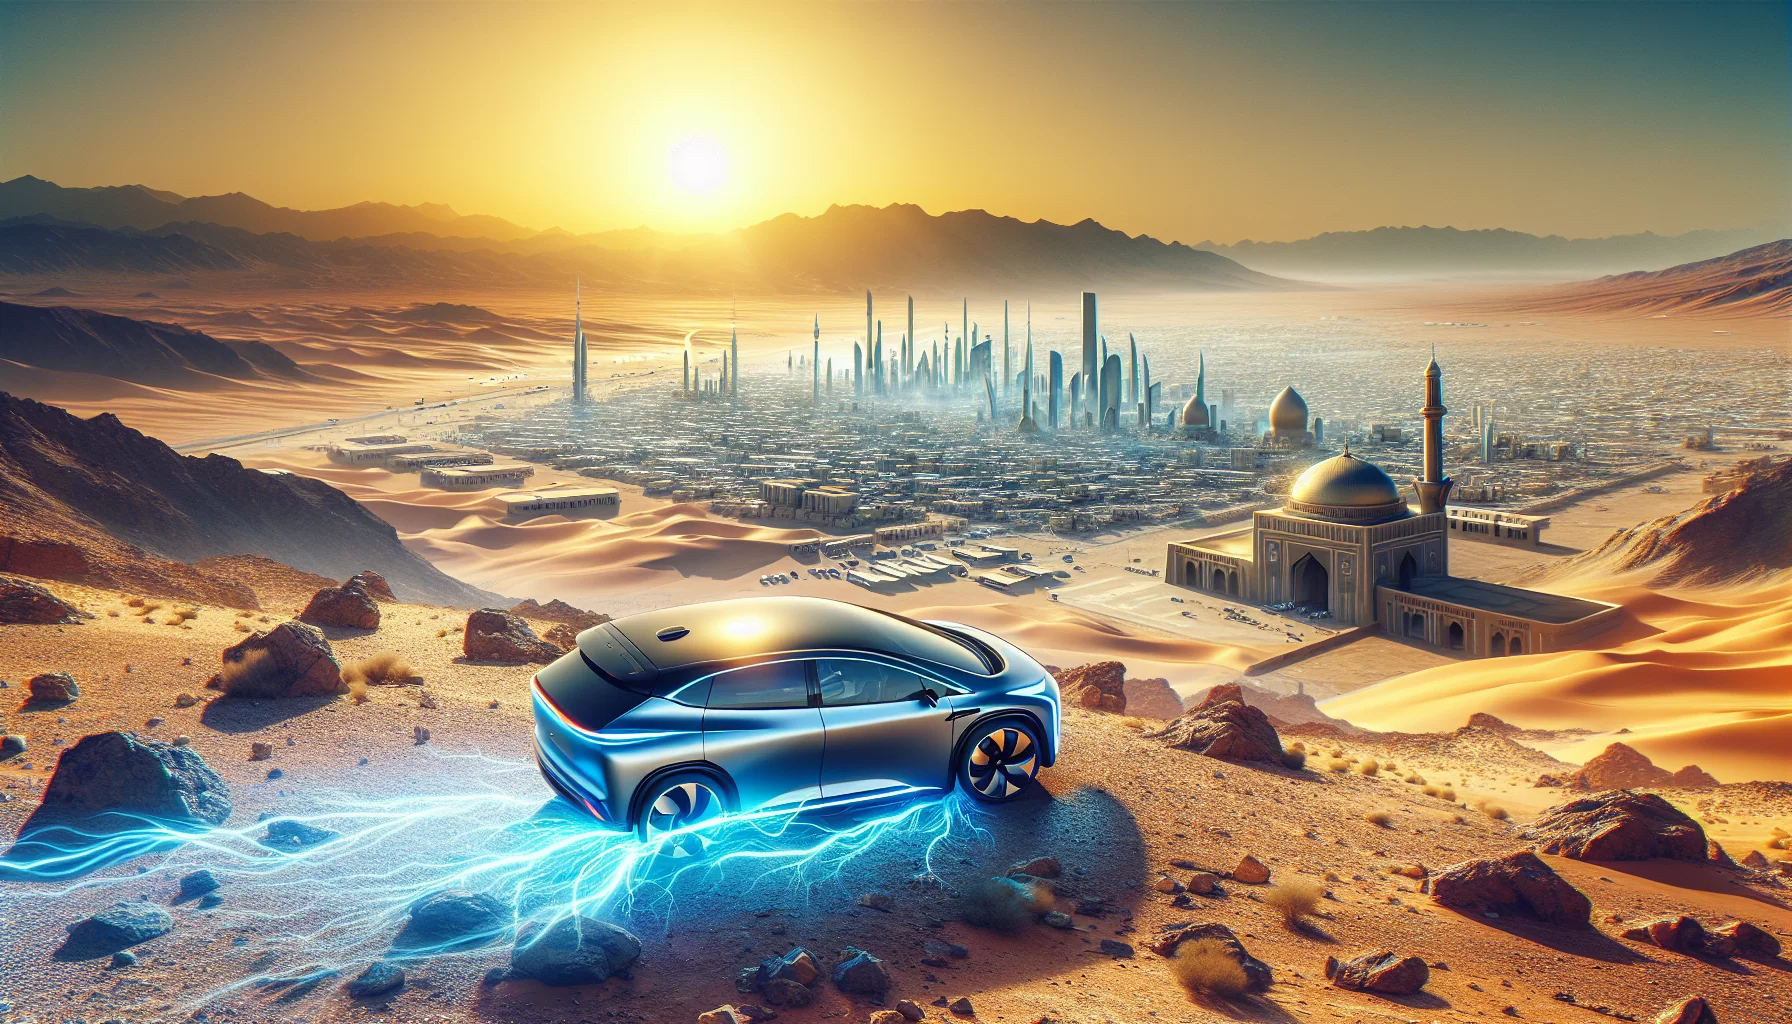 Nio revolutionizes automotive industry with expansion into Middle East